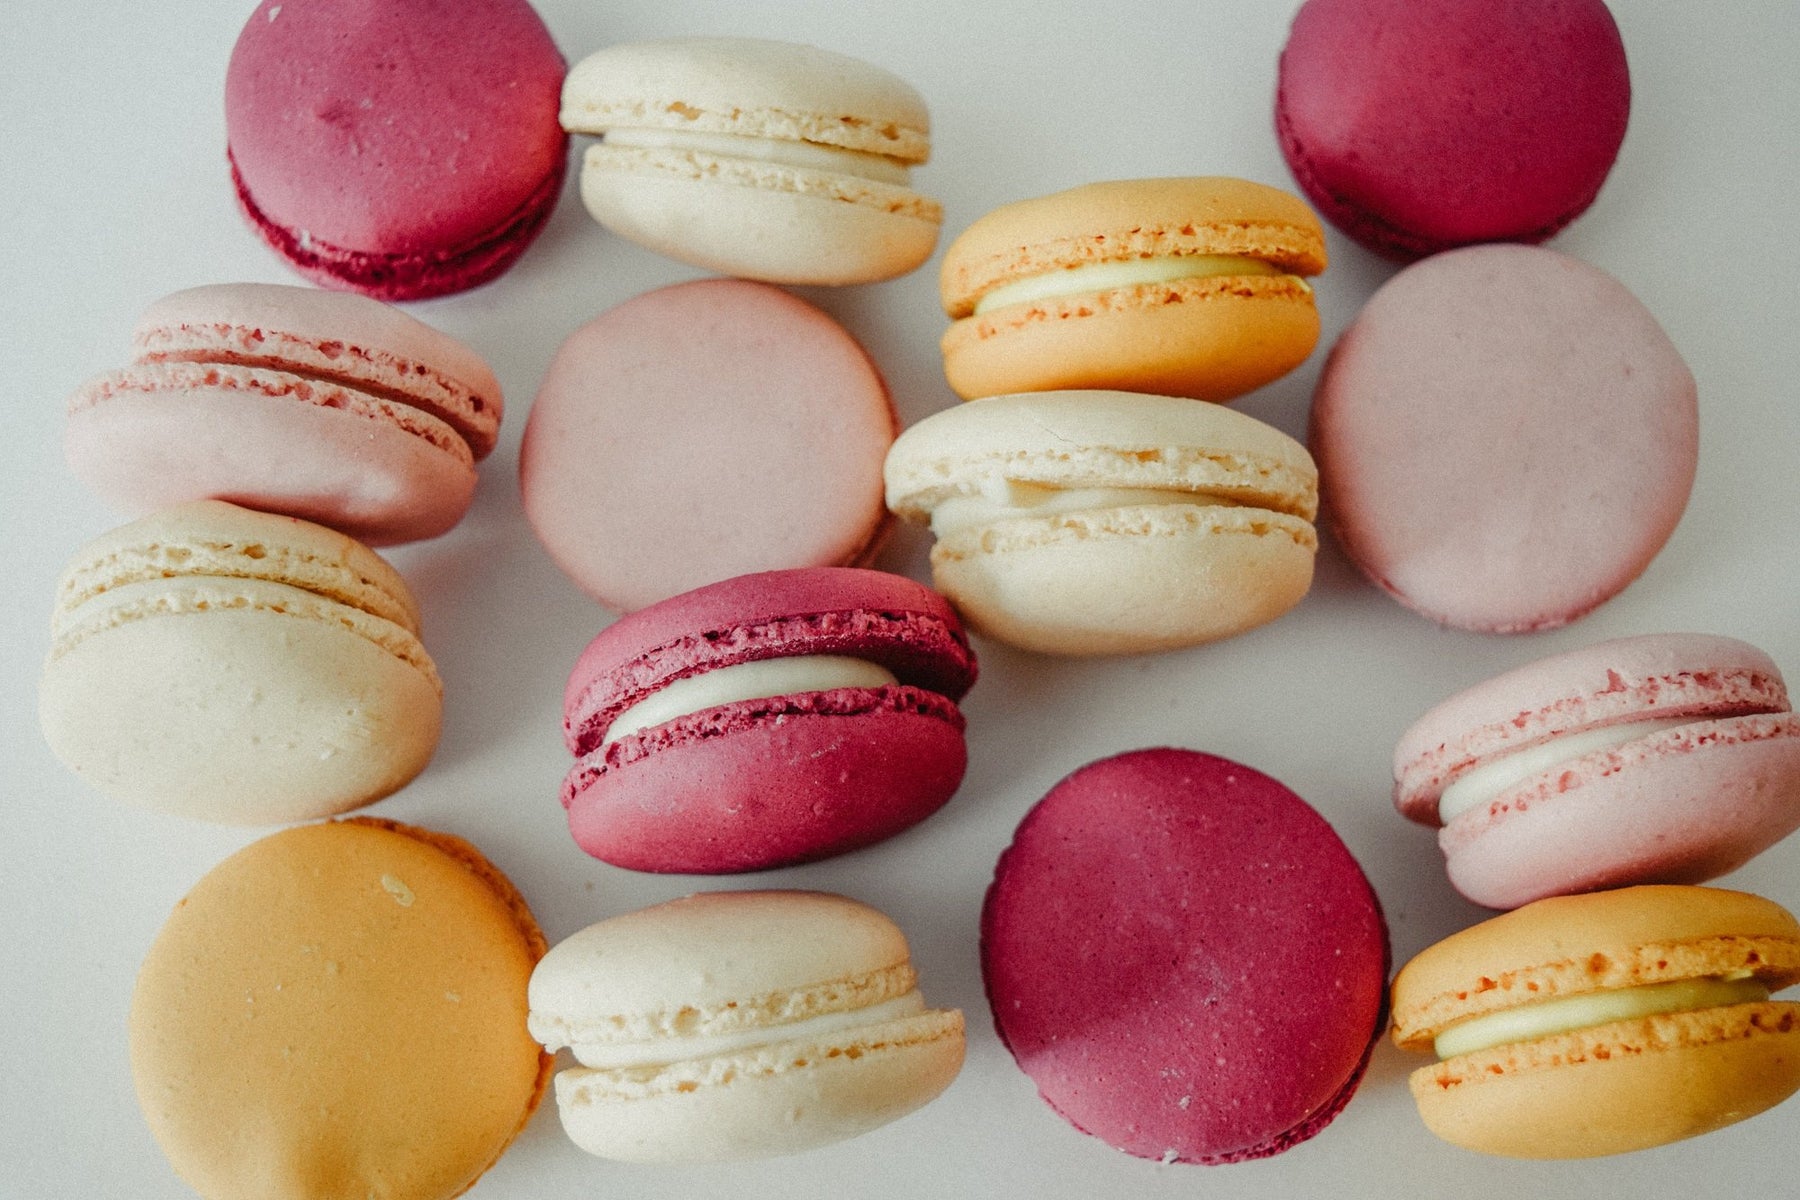 Step Aside Cupcakes, Macarons Are Taking Over